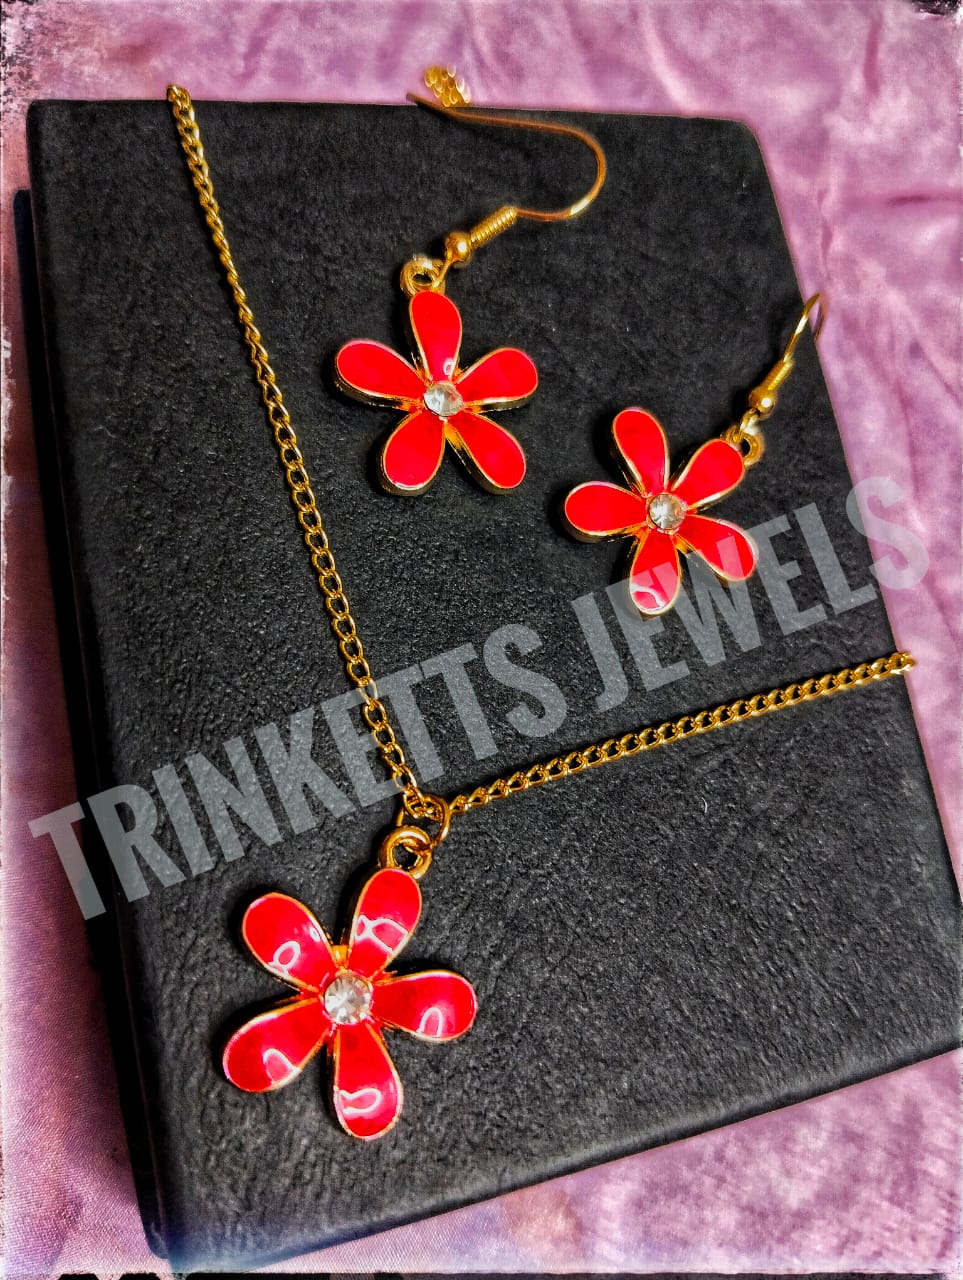 Trinketts Golden Combo Set: red floral charm - A stylish combo featuring matching earrings and pendant with a golden polish. The pendant mirrors the unique design of the earrings. Ideal for both kids and teens, this funky set adds a touch of individuality to your style. Perfect for Pakistani fashion enthusiasts seeking a blend of elegance and playfulness.